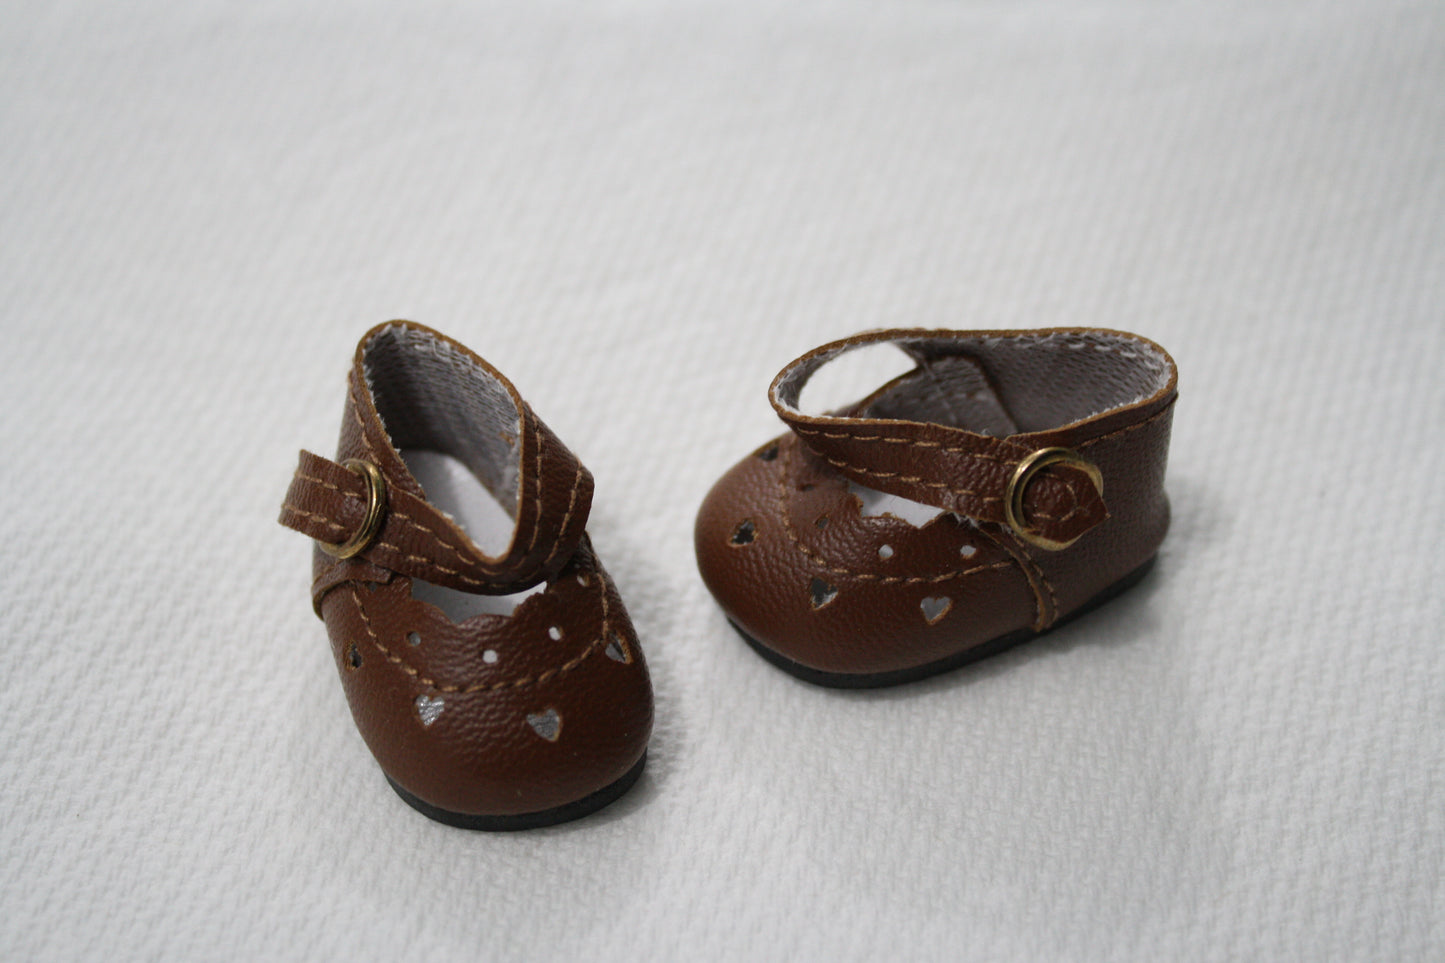 Baby Heart Shoes